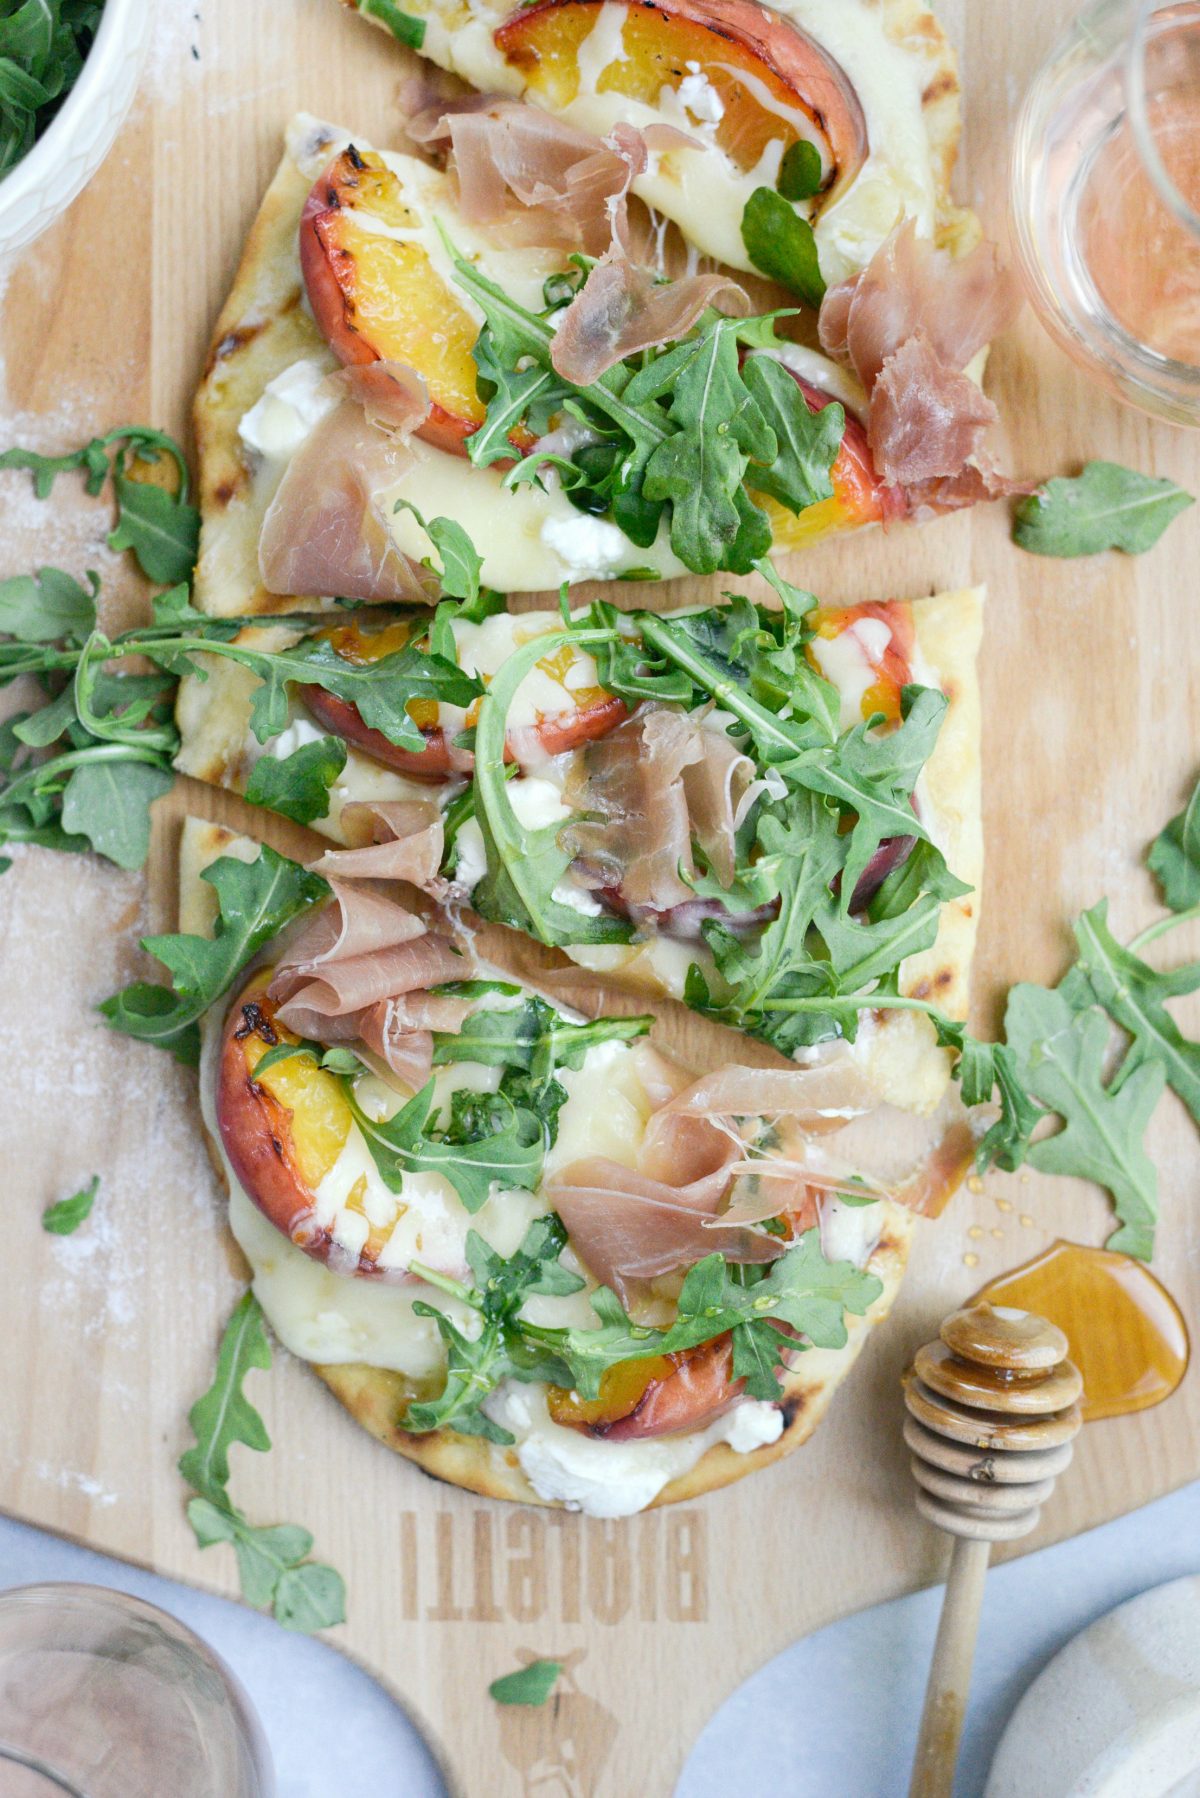 Grilled Peach, Goat Cheese and Prosciutto Flatbread